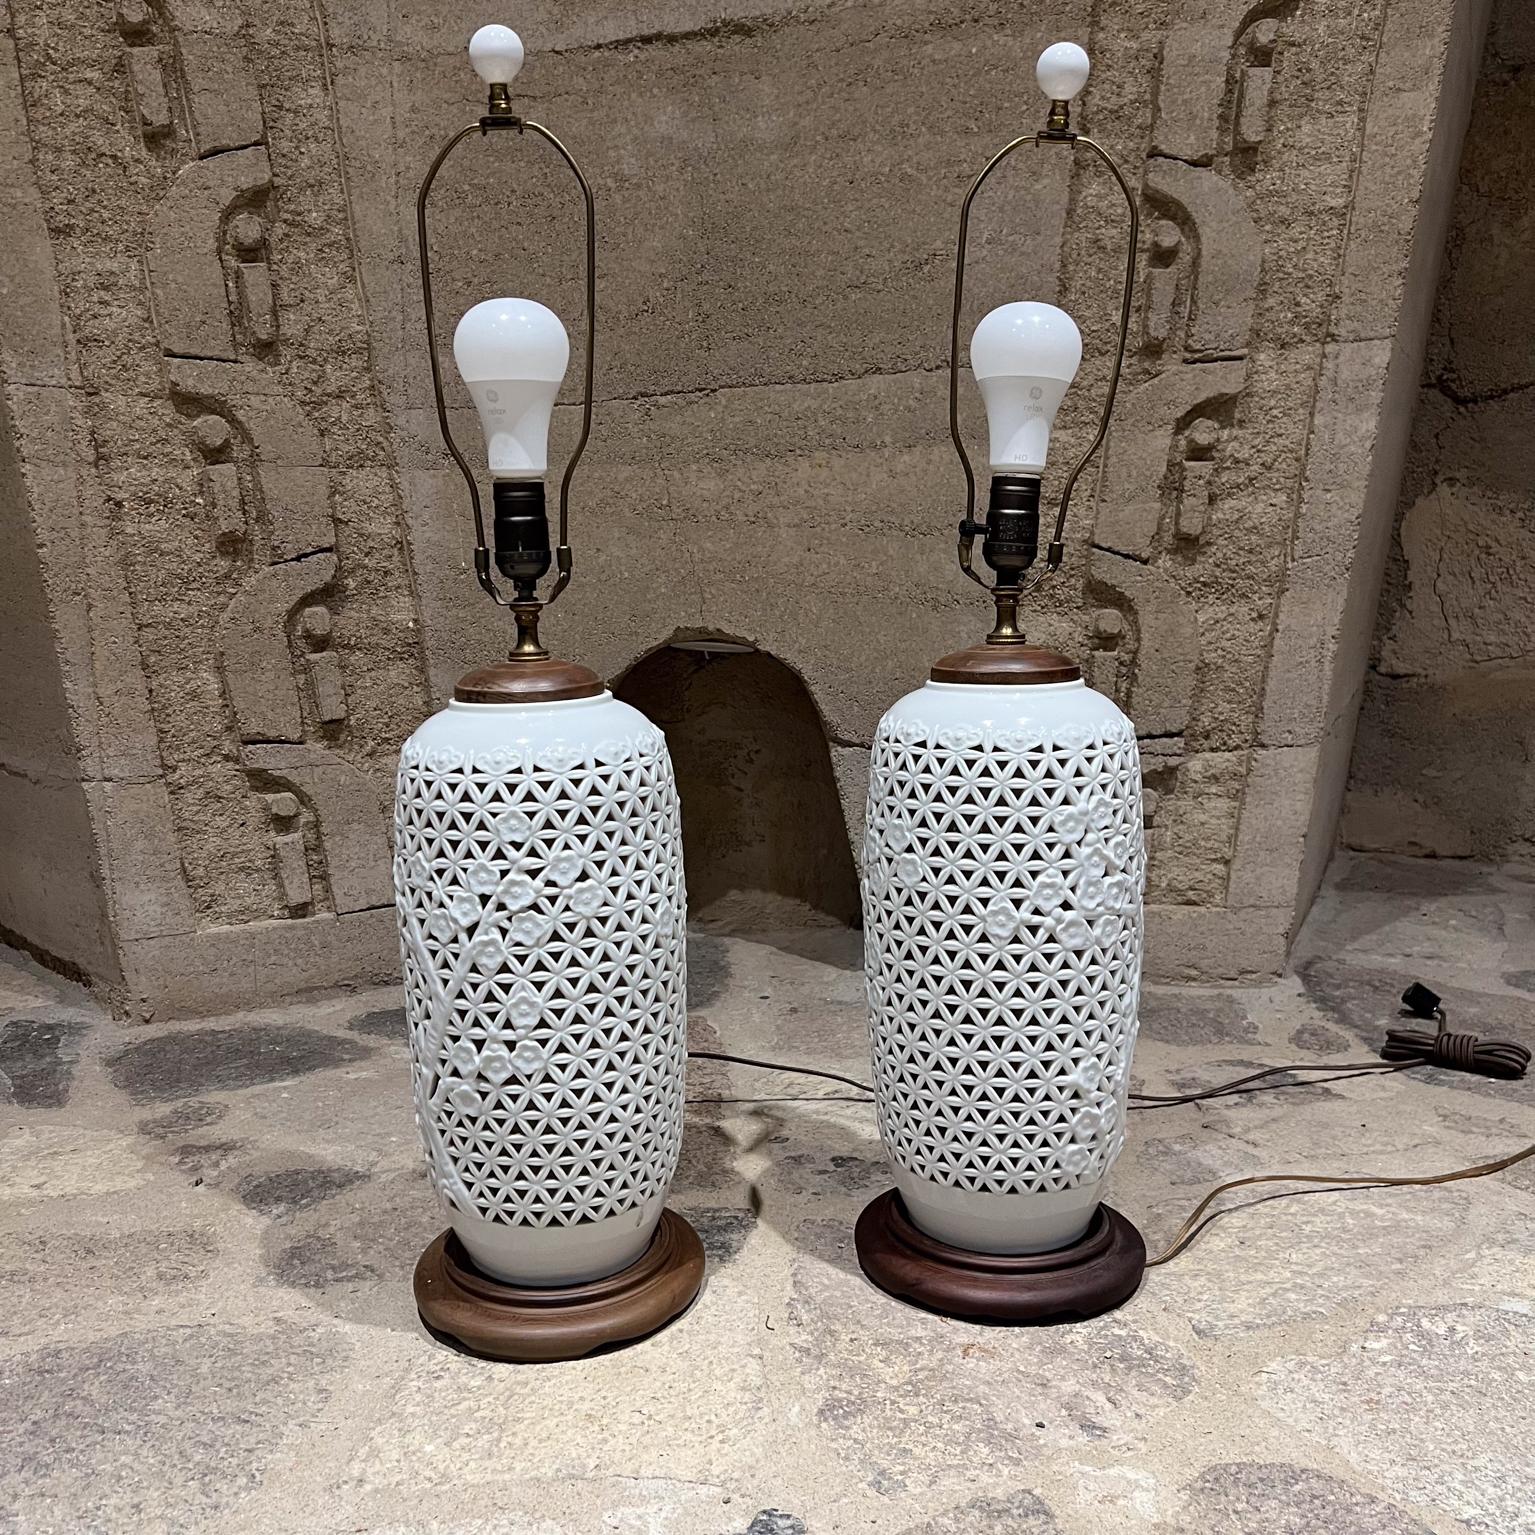 
1950s Pair of Table Lamps Chinese blanc de chine
Pierced Vase Lamps reticulated porcelain.
3-way intensity bulb switch. Bulbs are included.
No shades are included.
Wood base.
31.5 h 21 h to the socket x 8 diameter
Expect original unrestored vintage